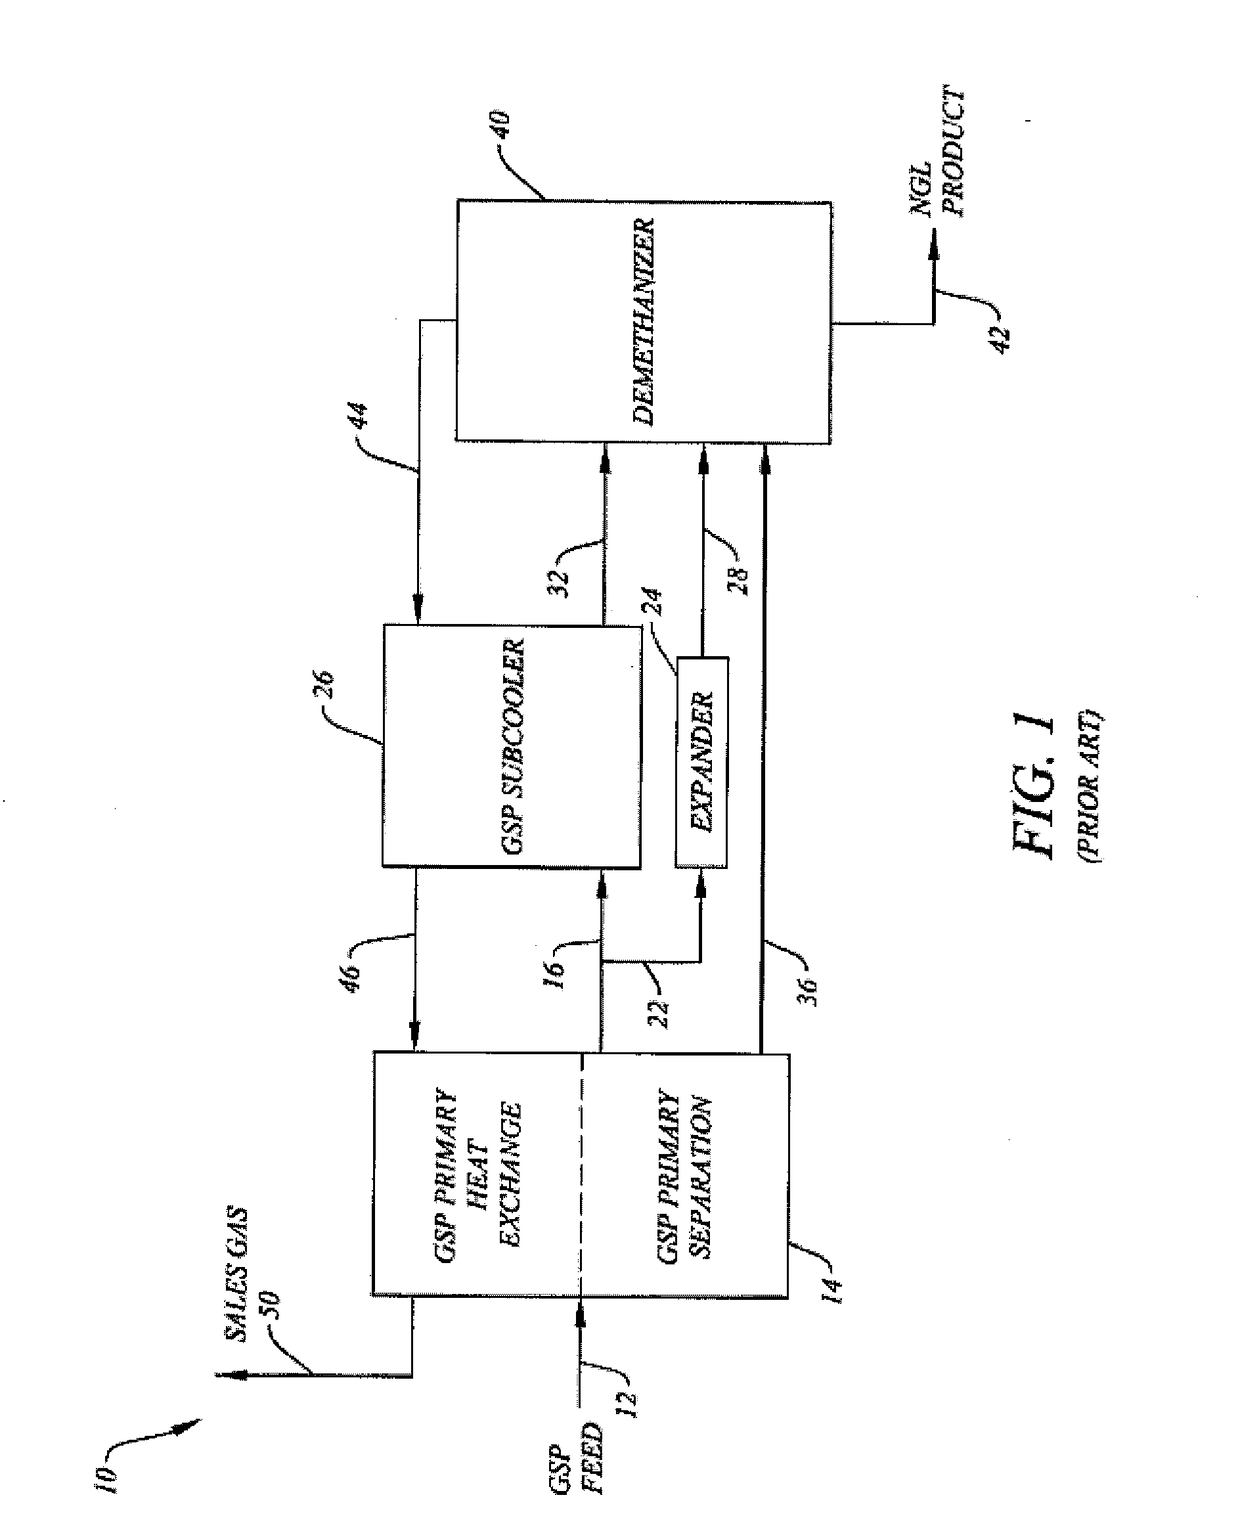 System and Method for Reducing Nitrogen Content of GSP/Expander Product Streams for Pipeline Transport